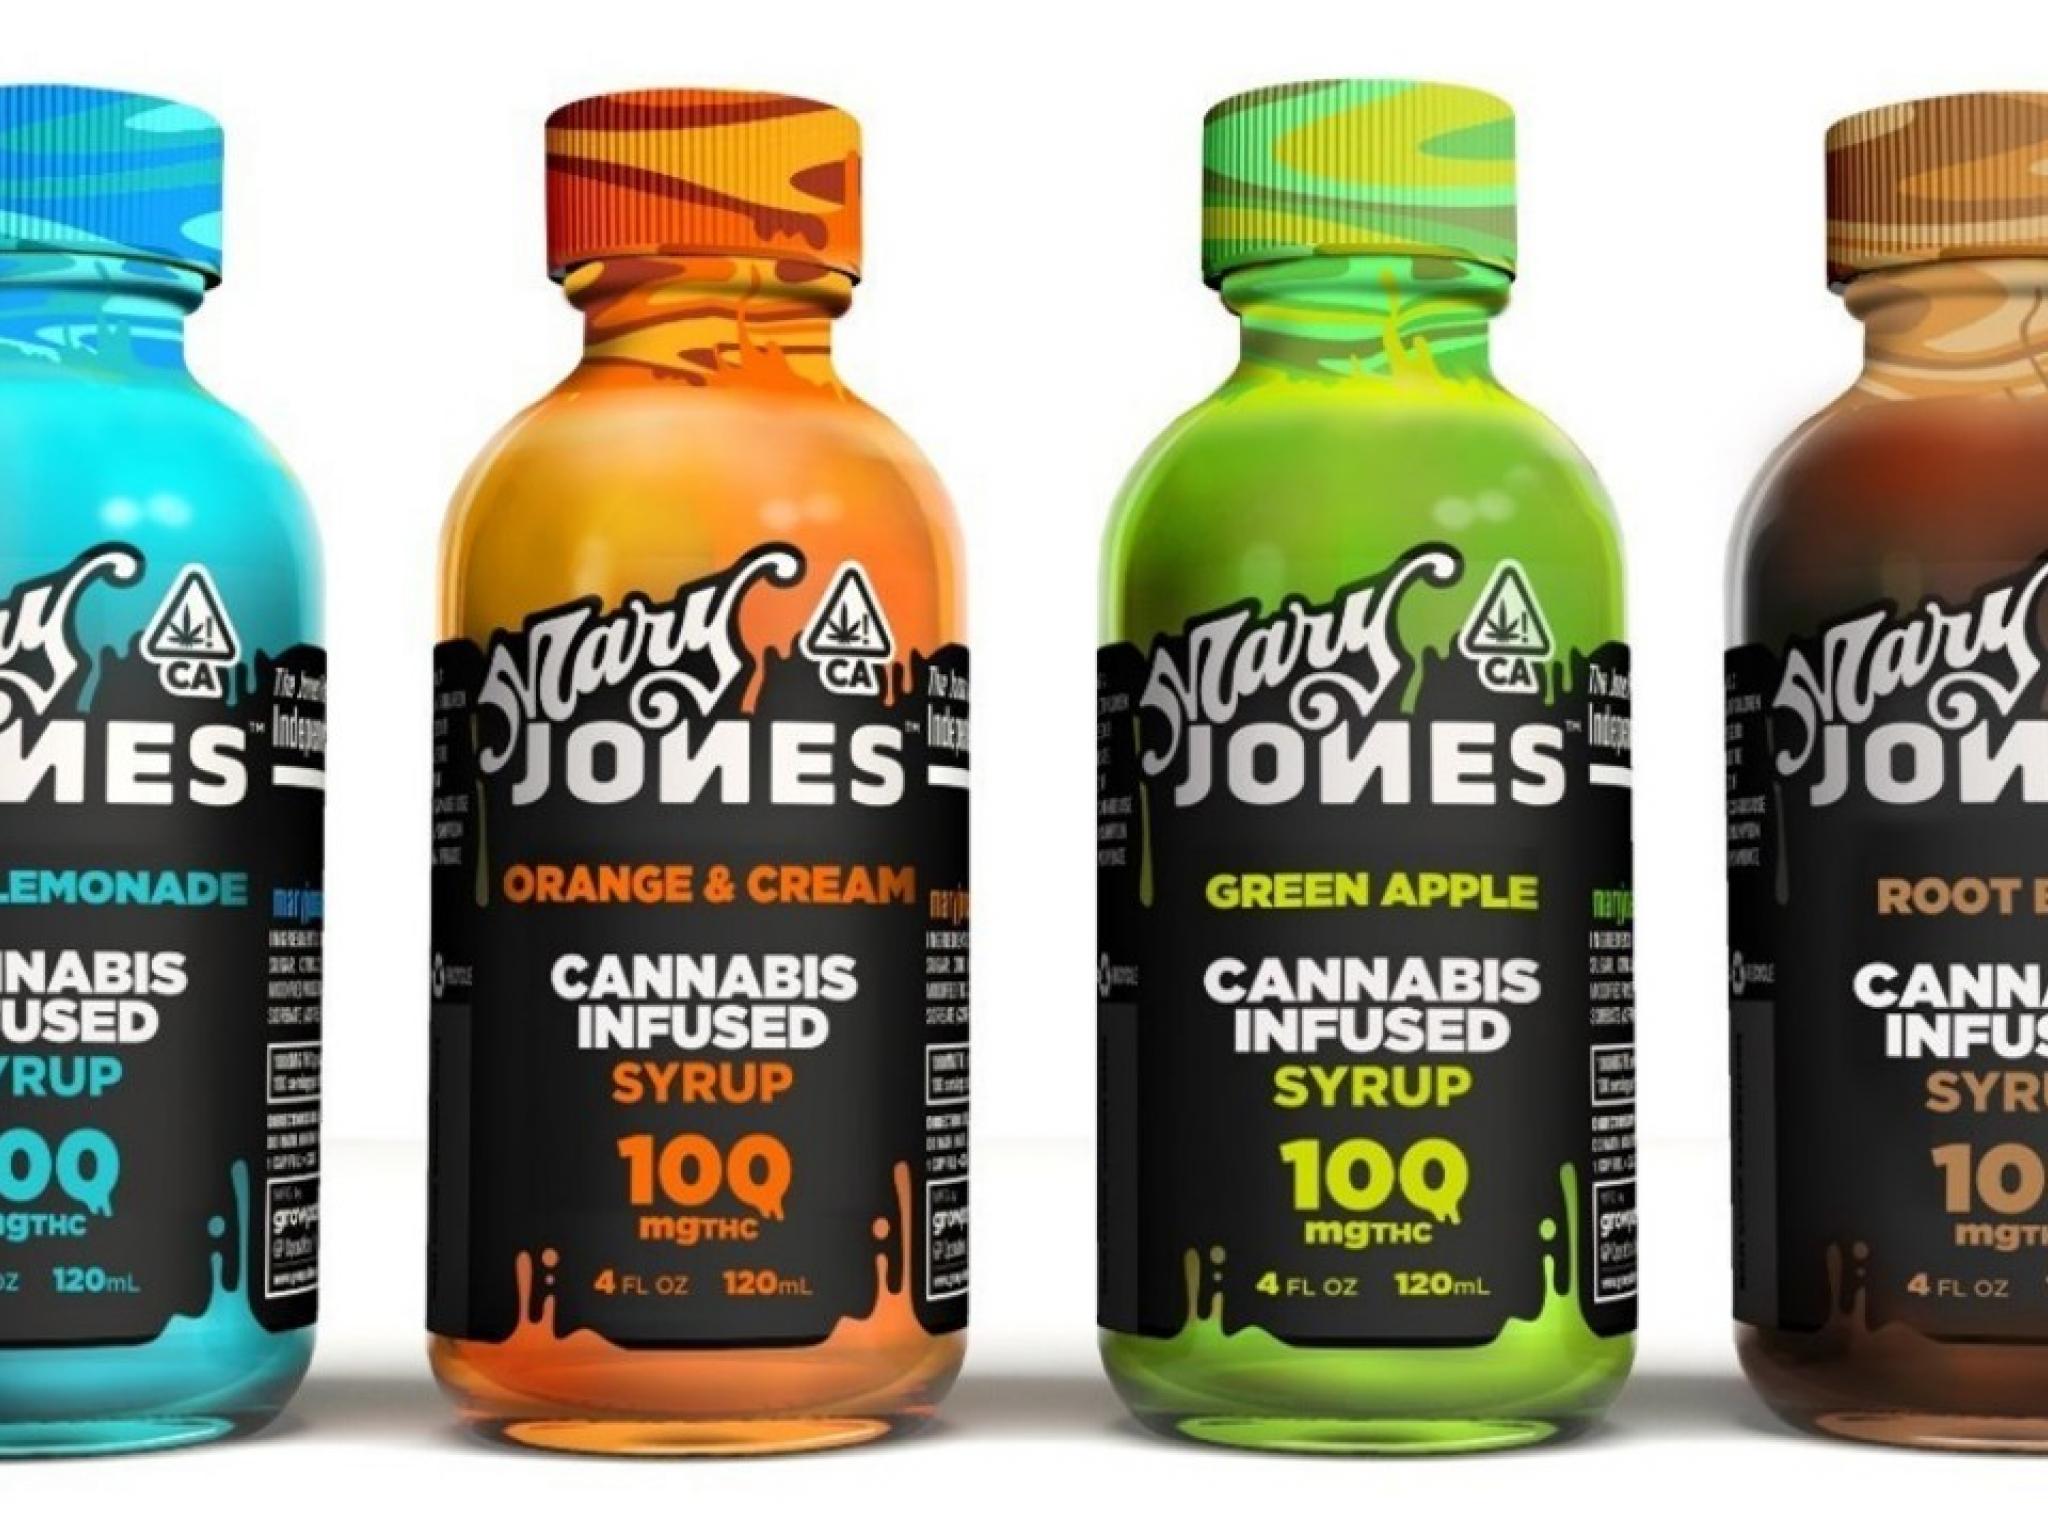  mary-jones-launches-cannabis-infused-syrups 